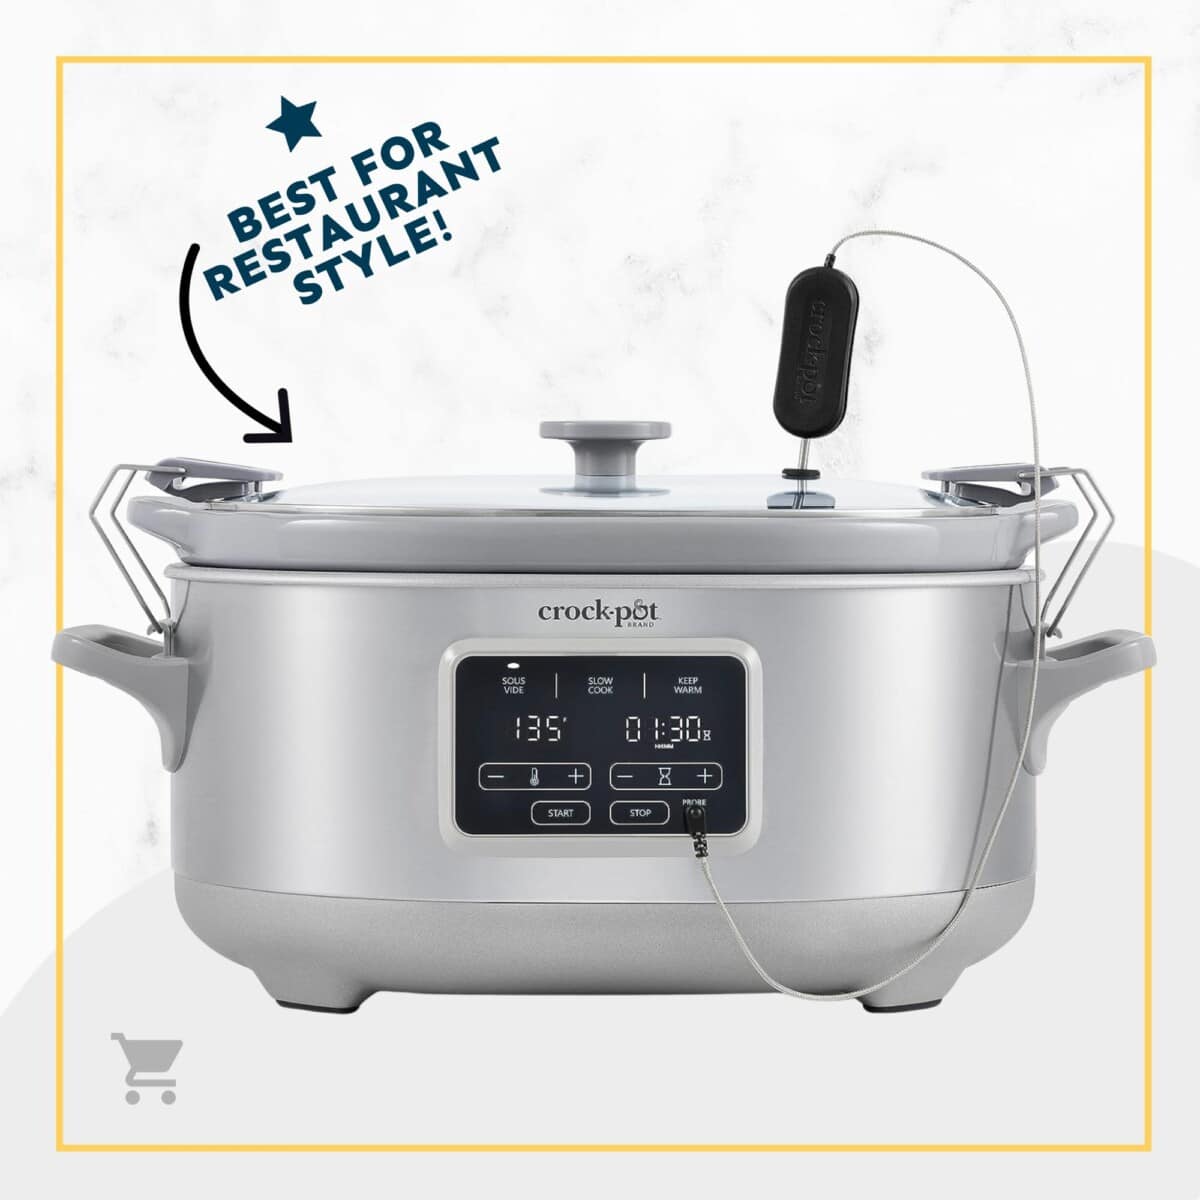 10 Best Slow Cookers with Fun Designs Because It Should Sit Pretty